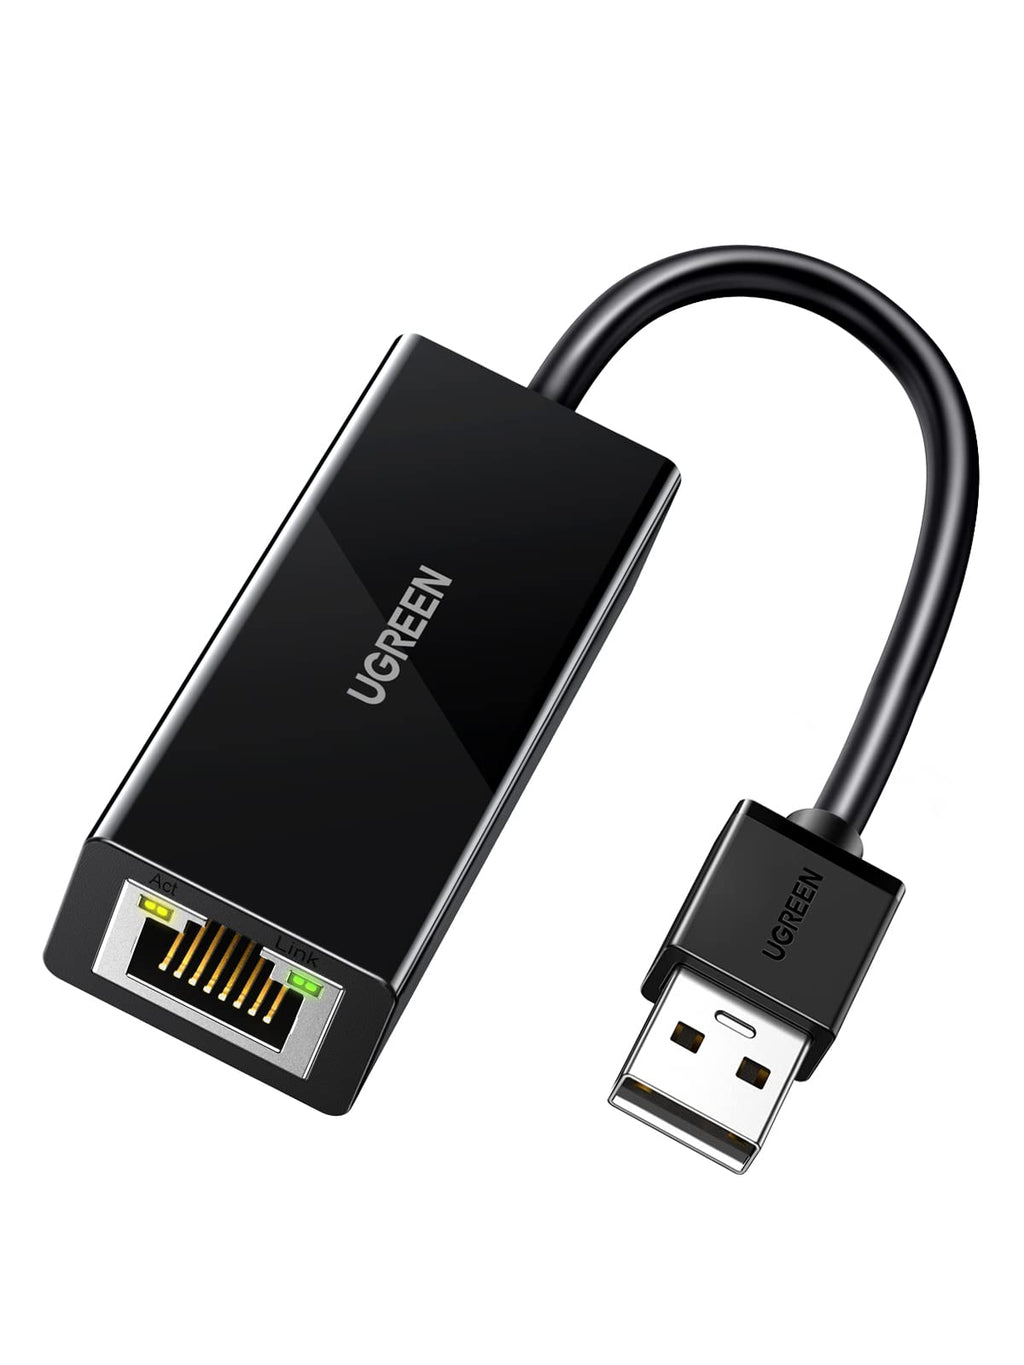  [AUSTRALIA] - UGREEN Ethernet Adapter USB to 10 100 Mbps Network Adapter RJ45 Wired LAN Adapter for Laptop PC Compatible with Nintendo Switch Wii Wii U MacBook Chromebook Surface Windows macOS Linux (Black) Black